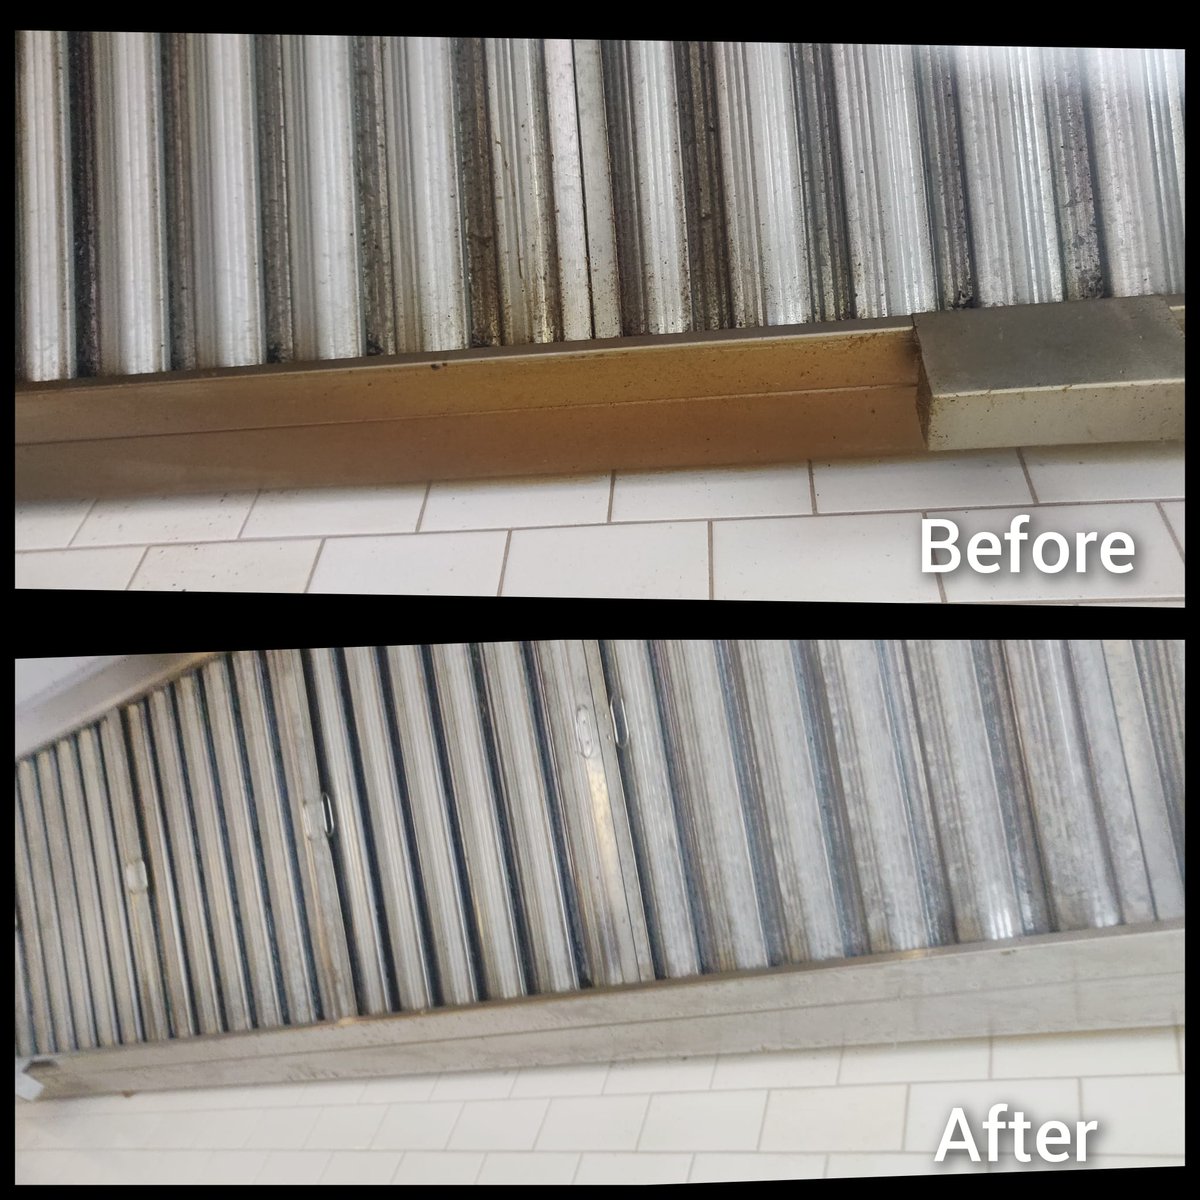 Before & After cleaning. Commercial exhaust hood cleaning across ONTARIO. #hoodcleaning #exhausthoodcleaning #ventcleaning #commercialhoodcleaning #filterscleaning